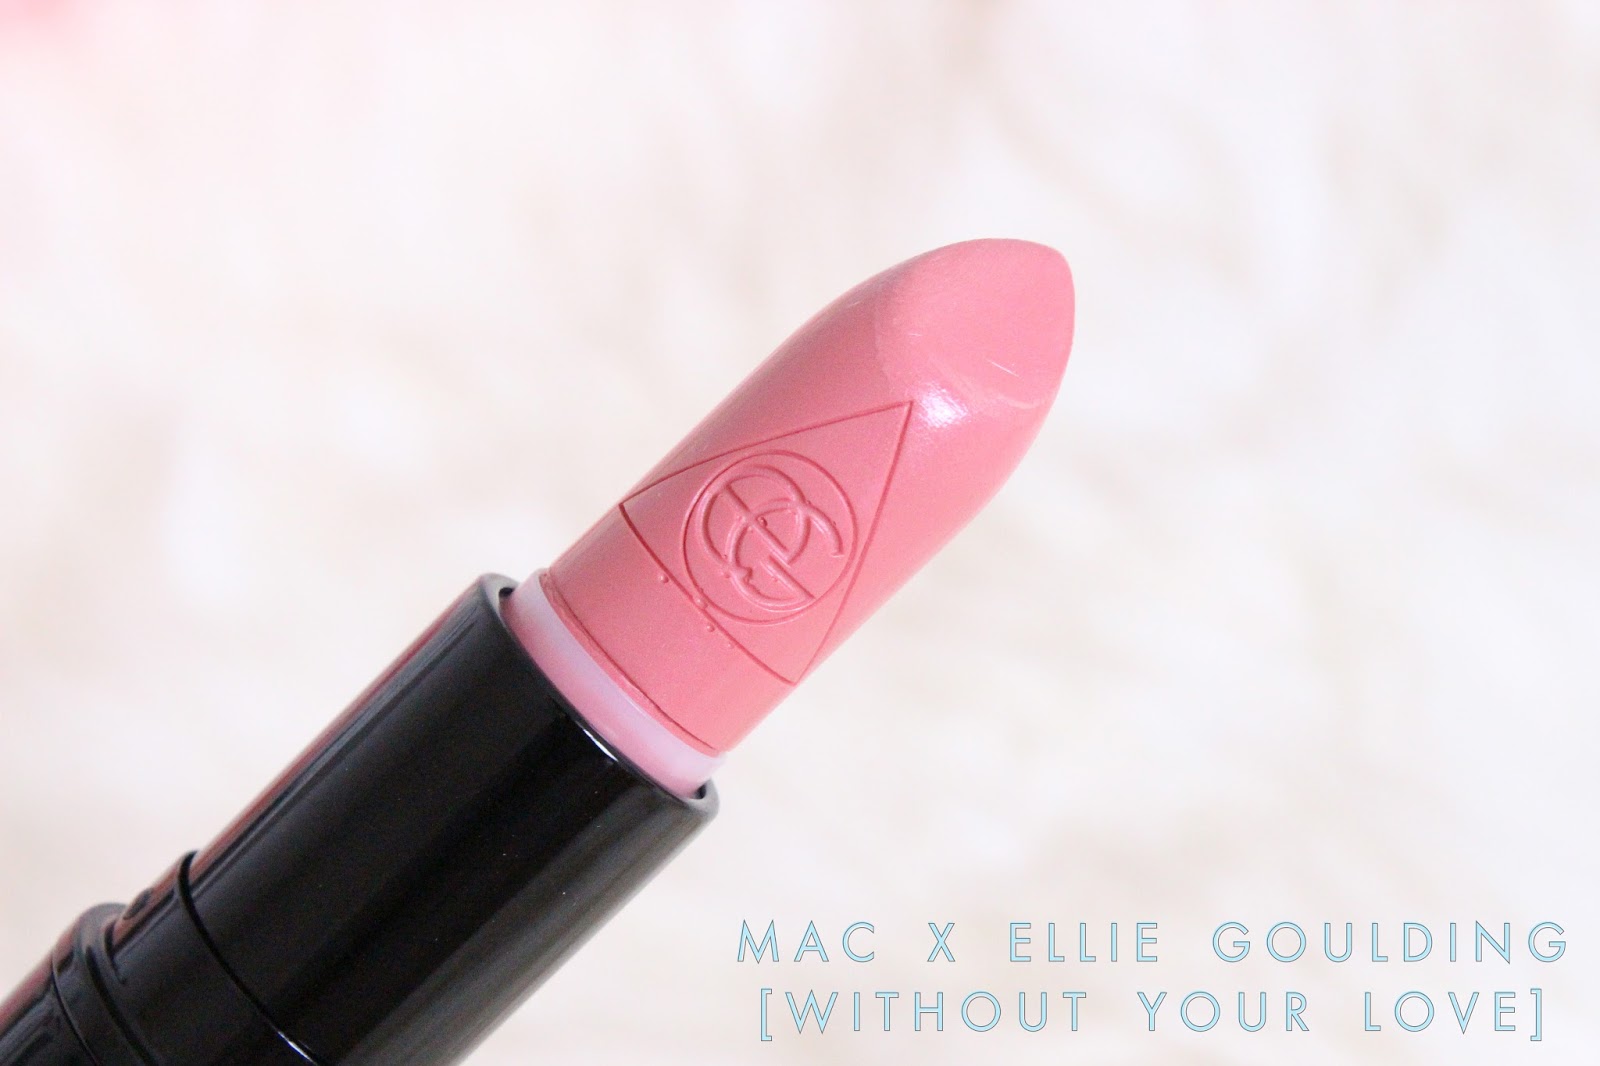 MAC X Ellie Goulding Lipstick in 'Without Your Love' and